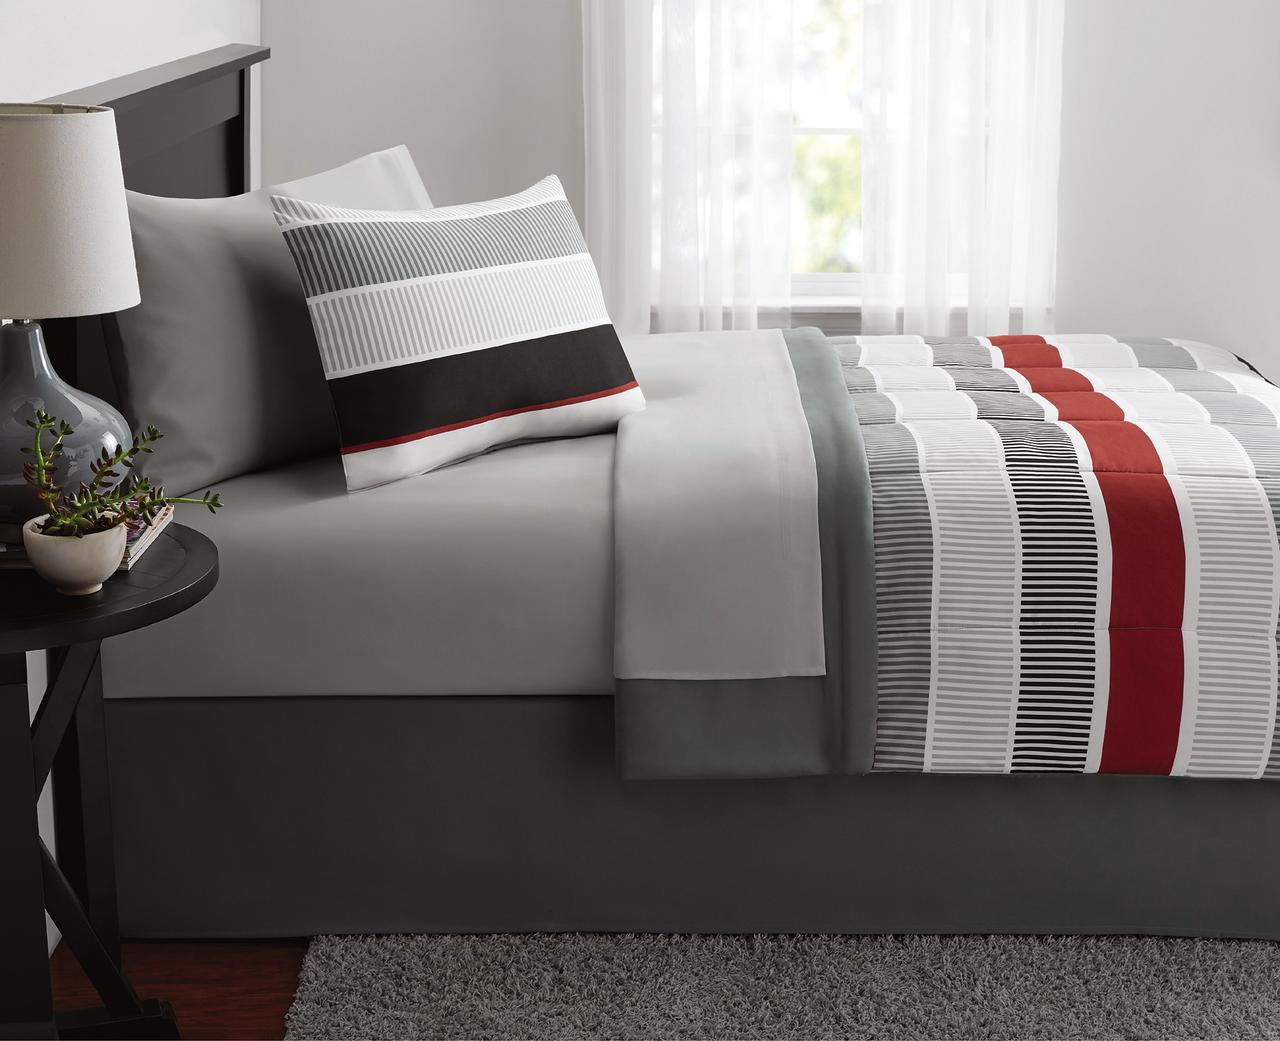 Red And White Stripe 8 Piece Bedding Set Coordinating Bed In A Bag Mainly Bedding